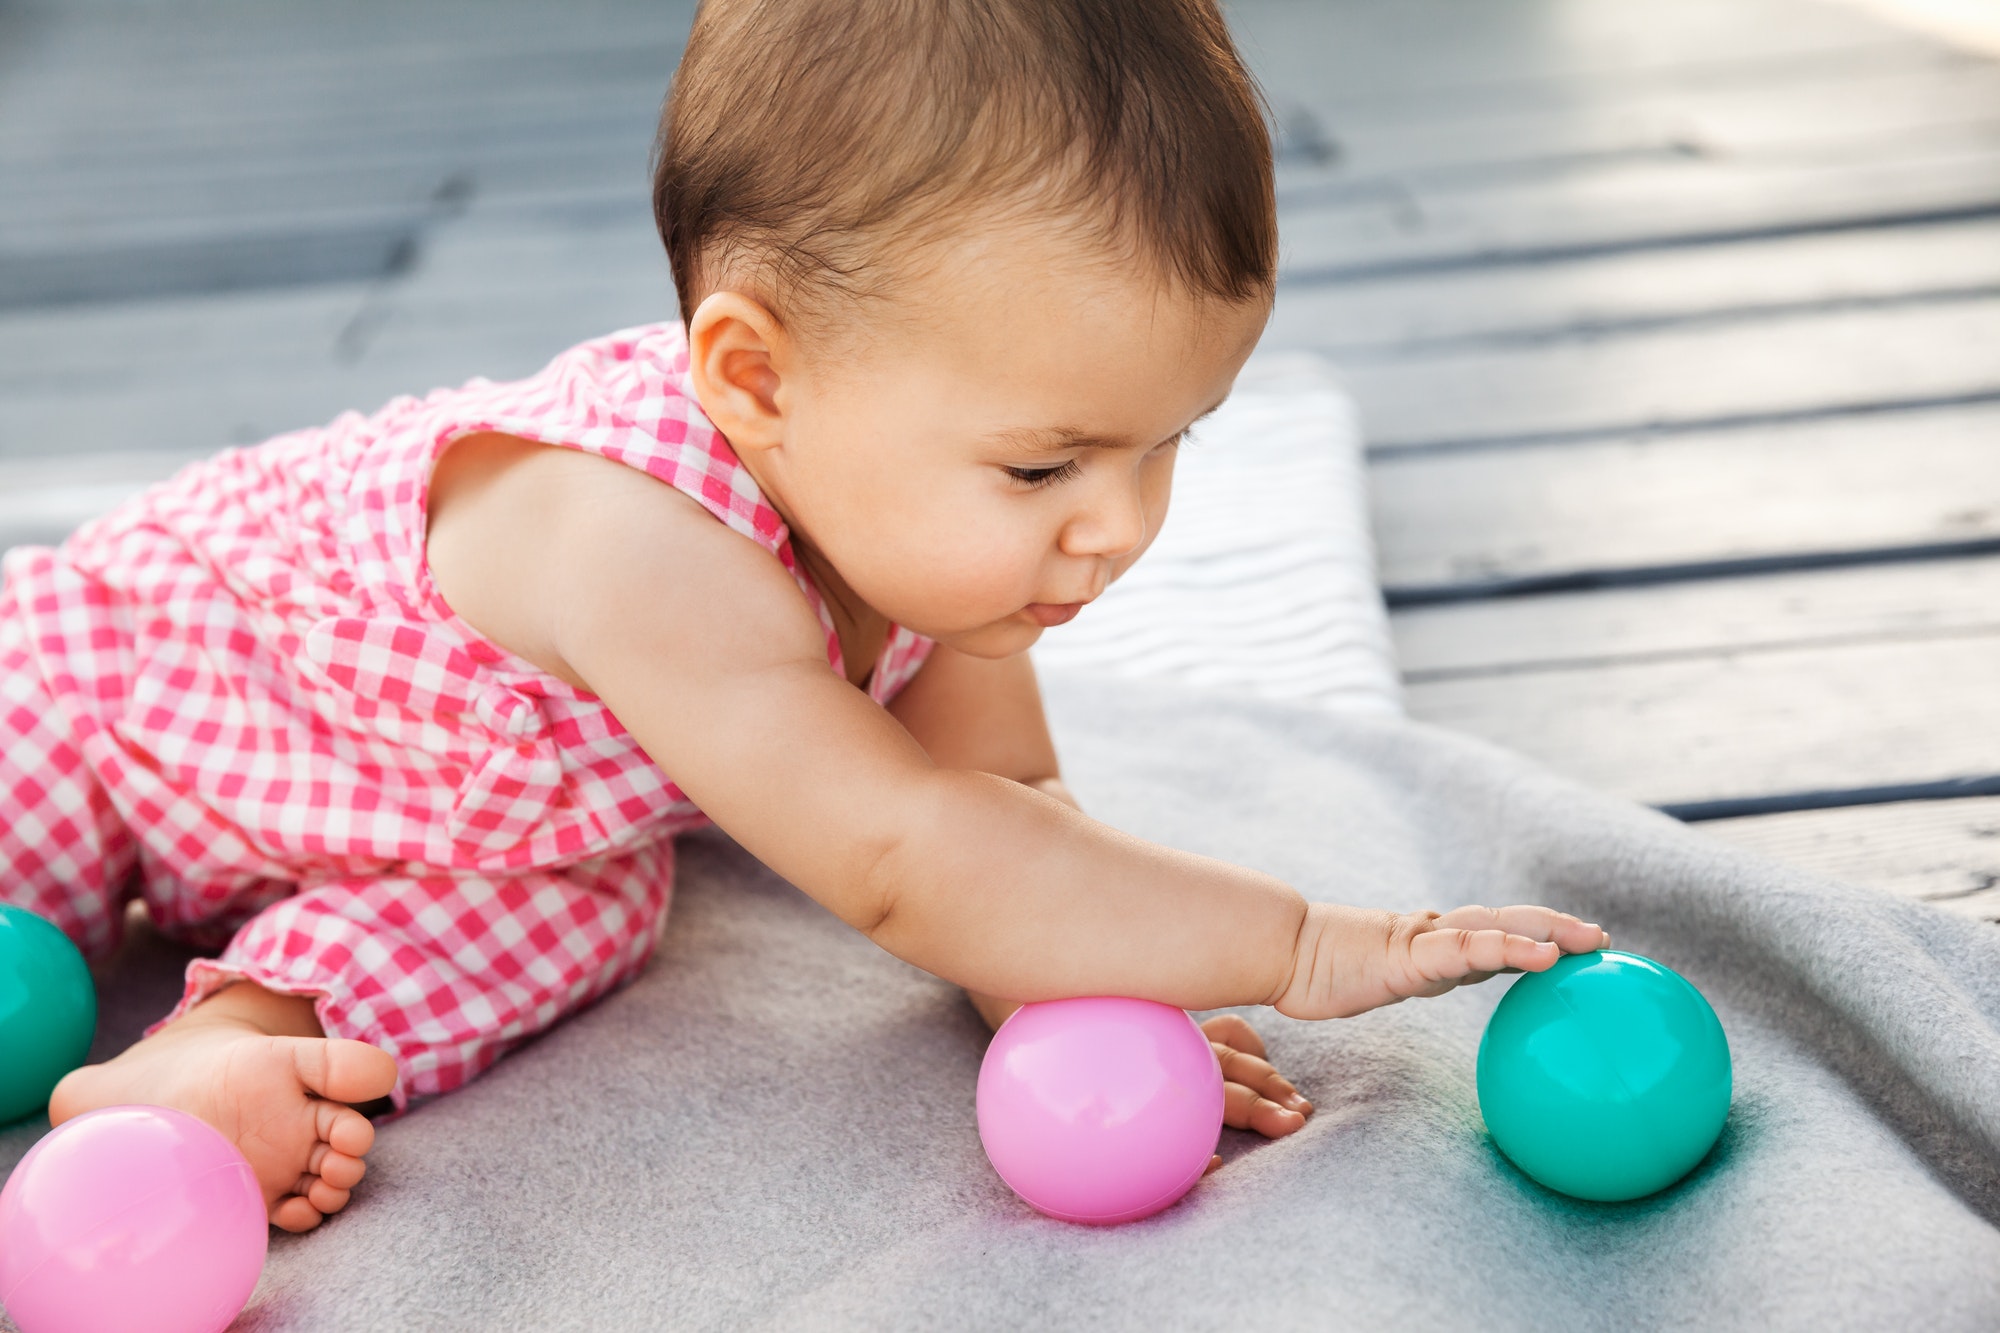 Infant baby girl playing with colorful balls